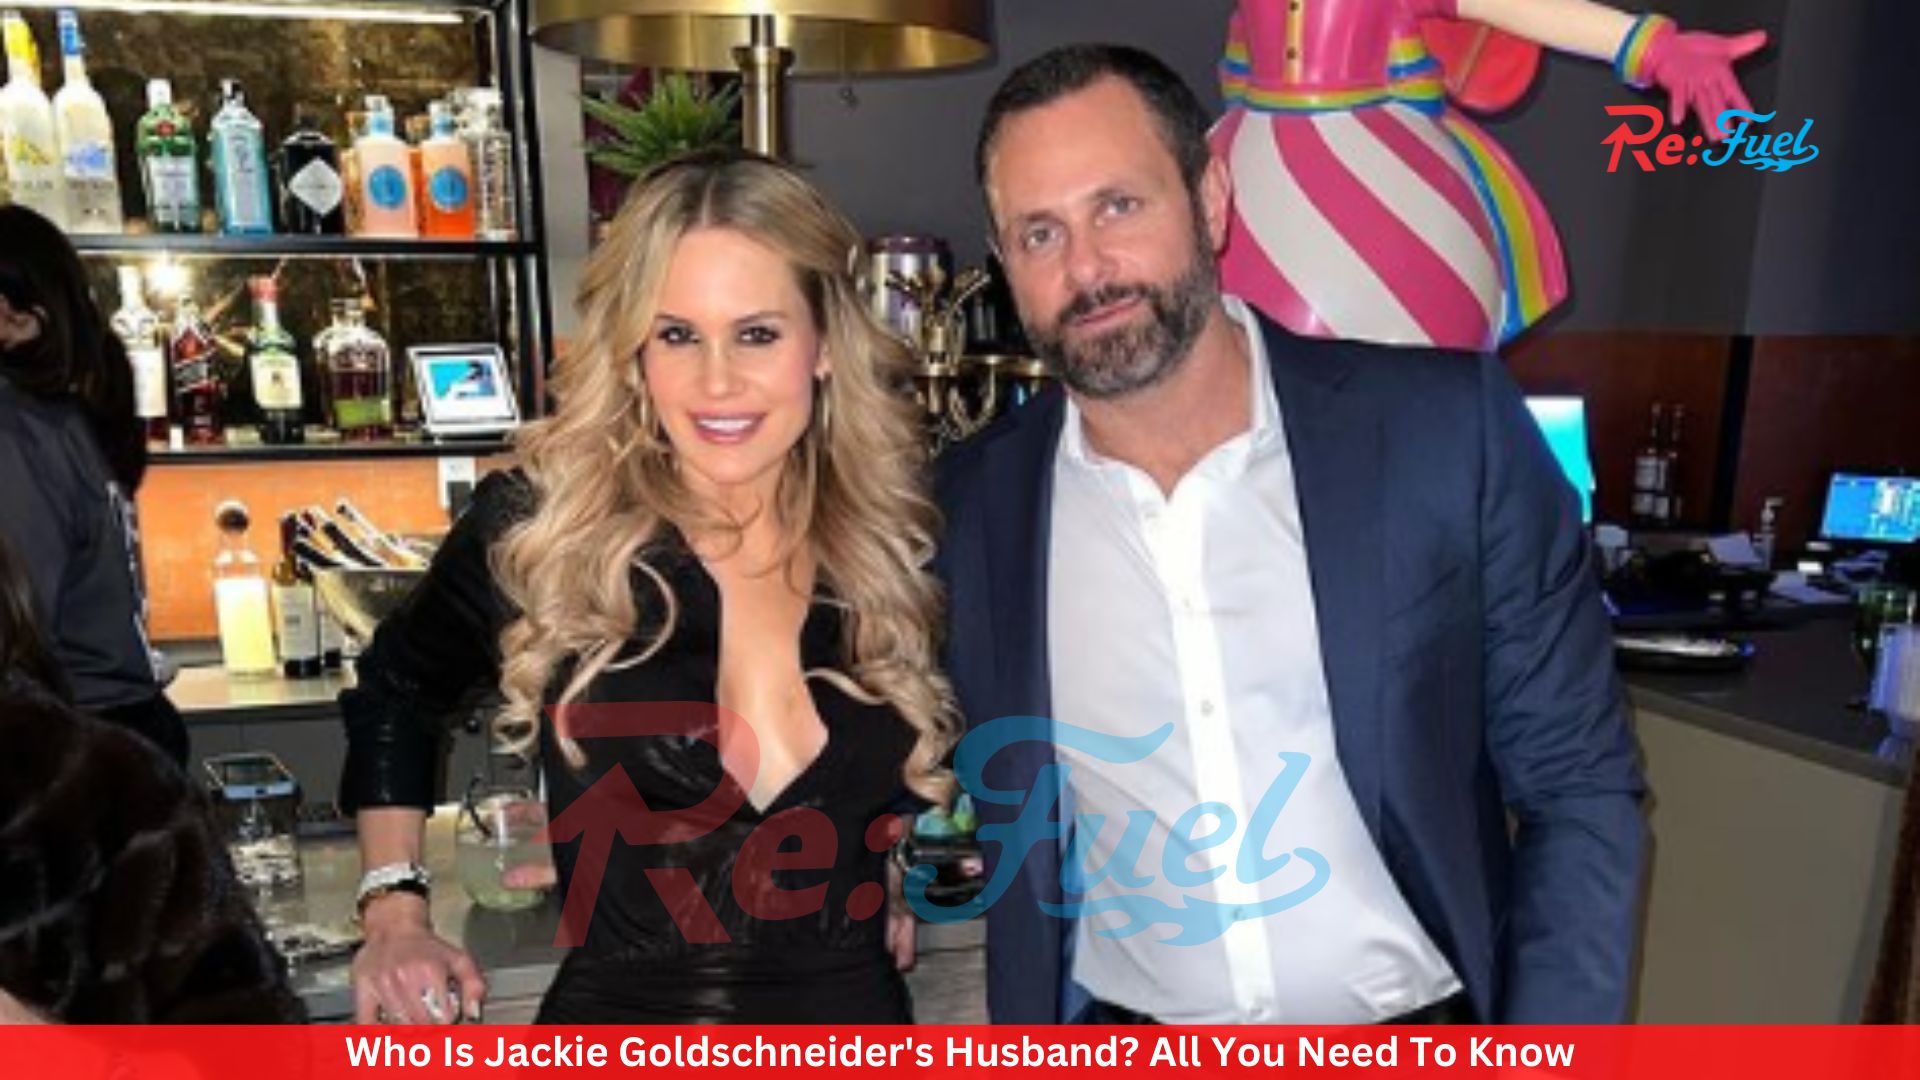 Who Is Jackie Goldschneider's Husband? All You Need To Know